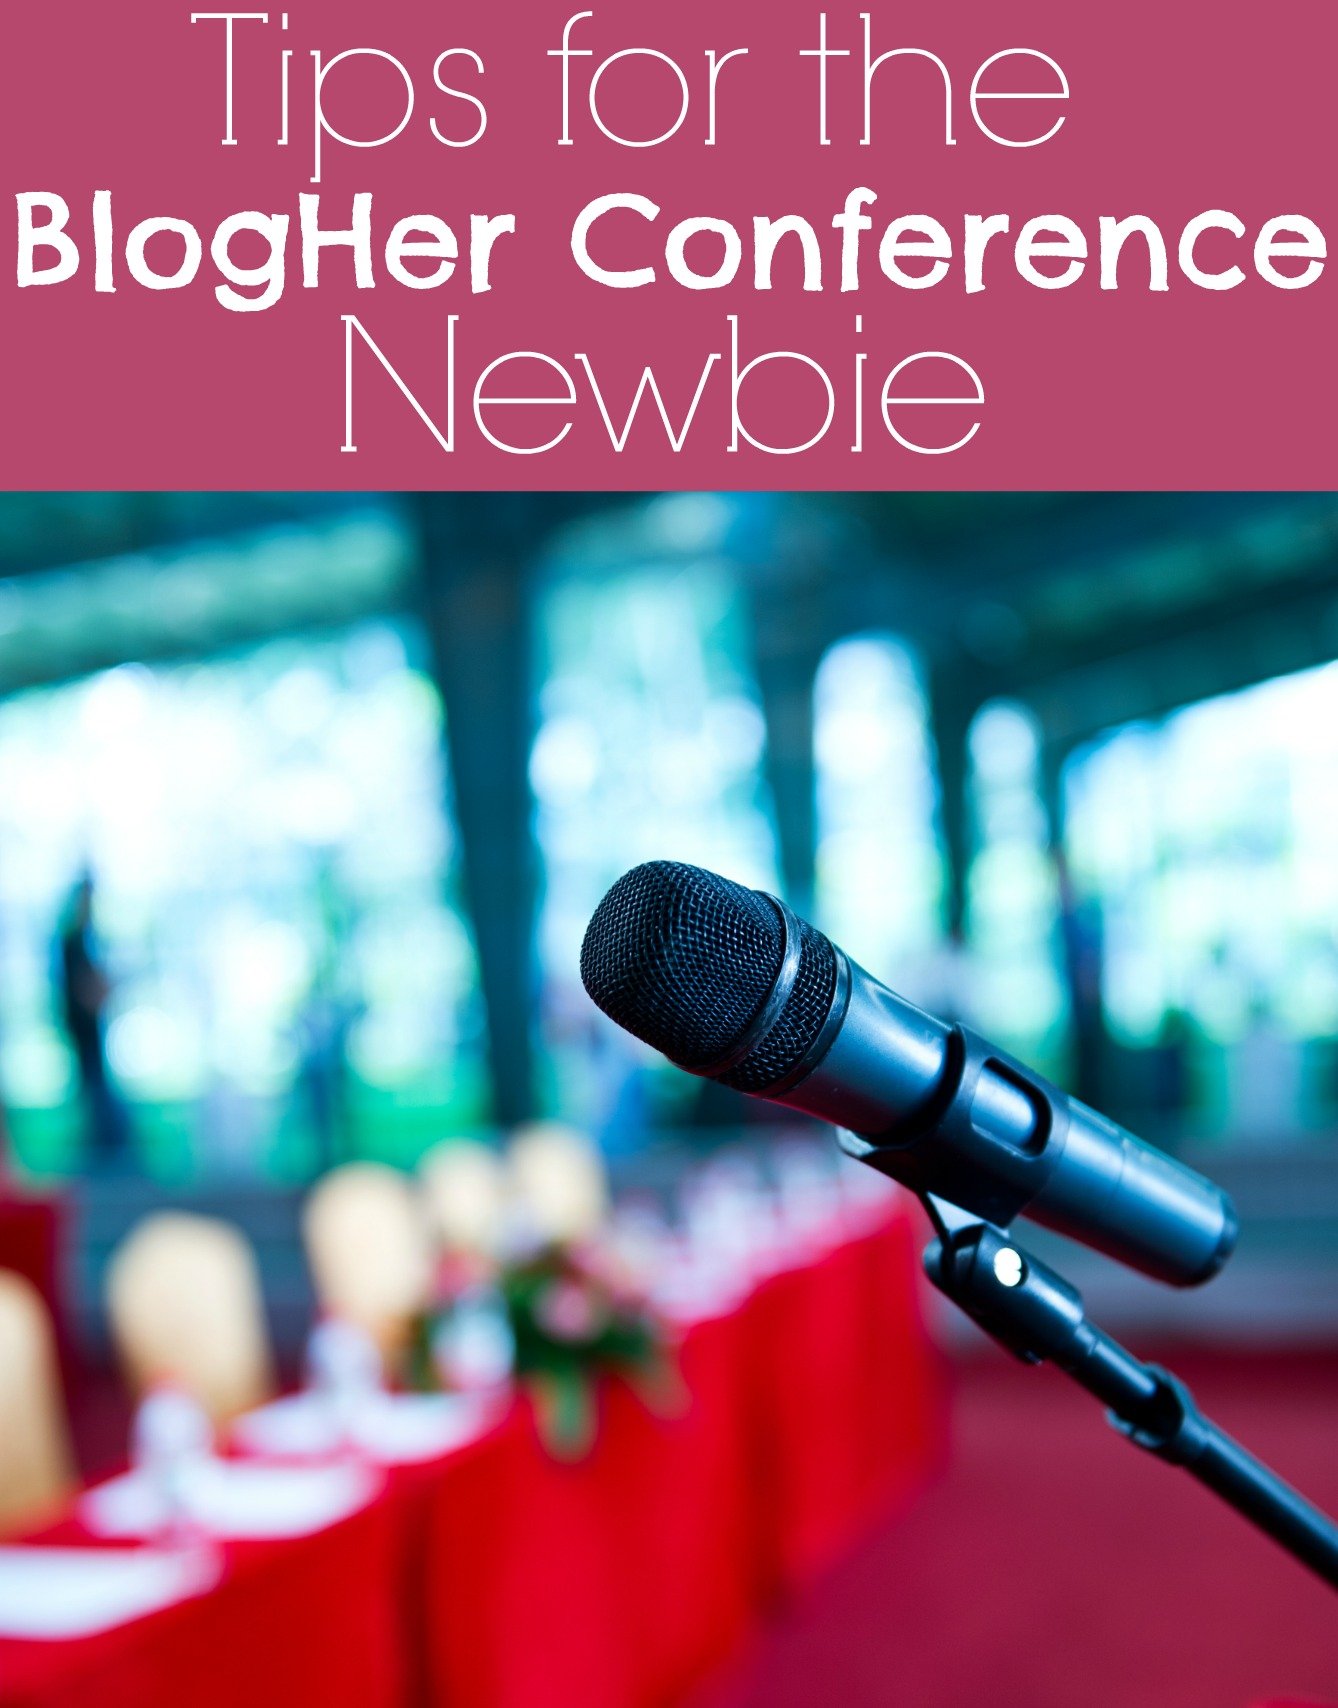 Tips for the BlogHer Conference Newbie!